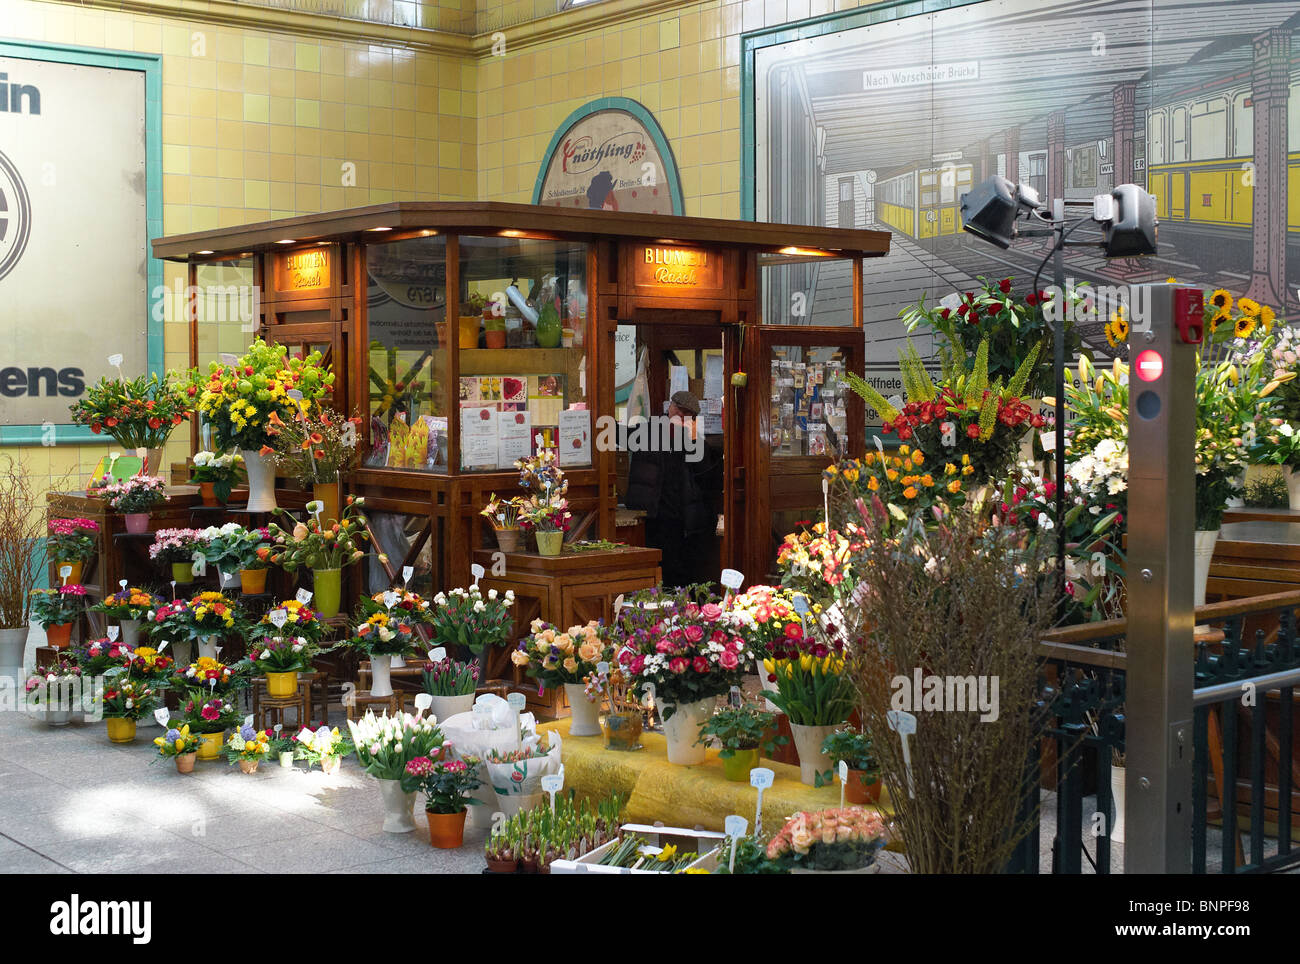 A flower shop in the subway station Wittenberg Platz, Berlin, Germany Stock Photo